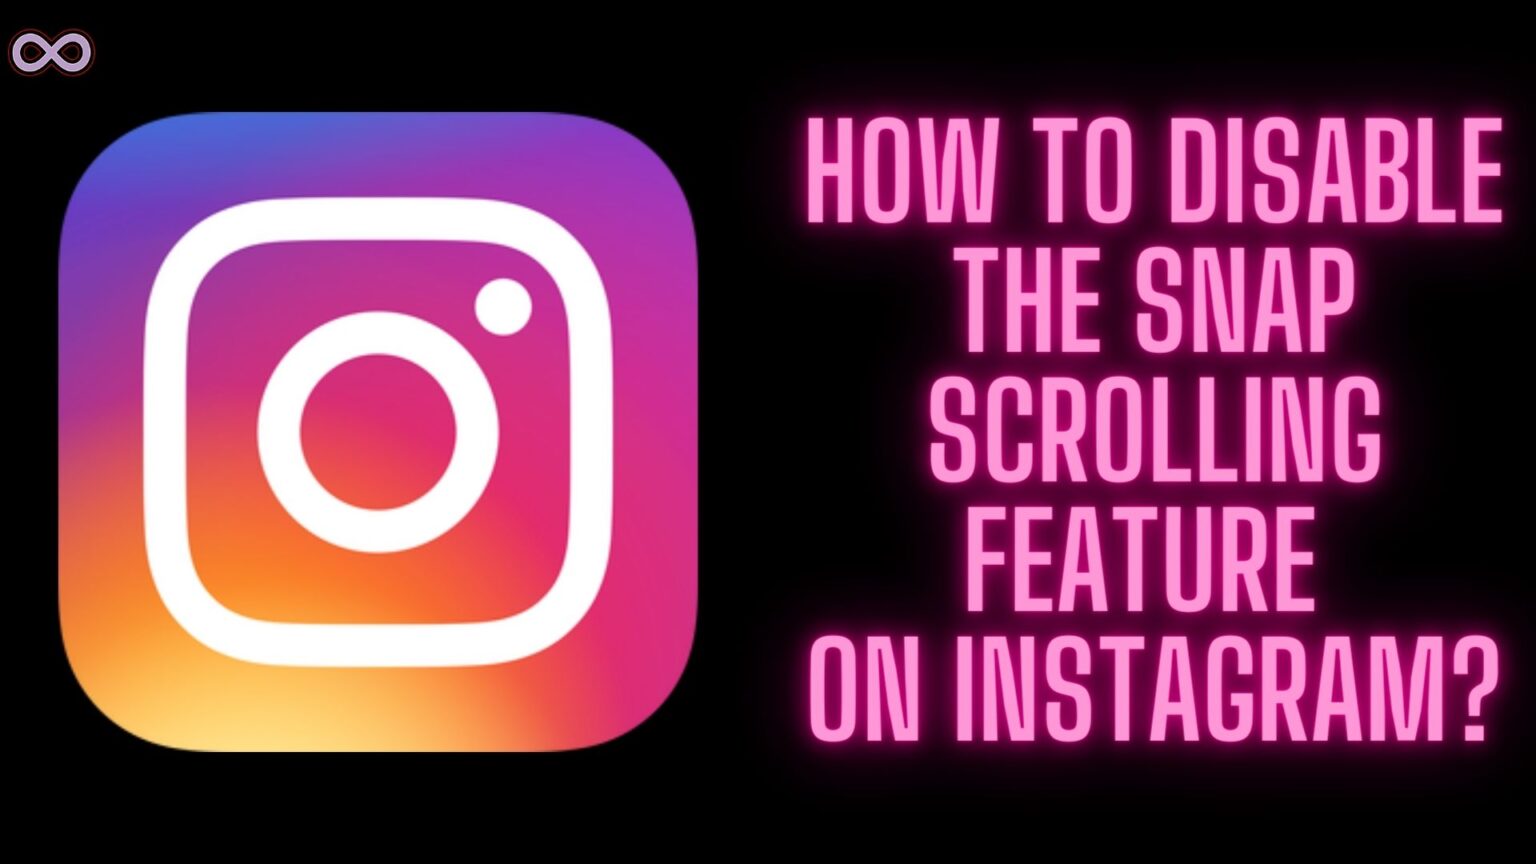 Disable Snap Scrolling on Instagram